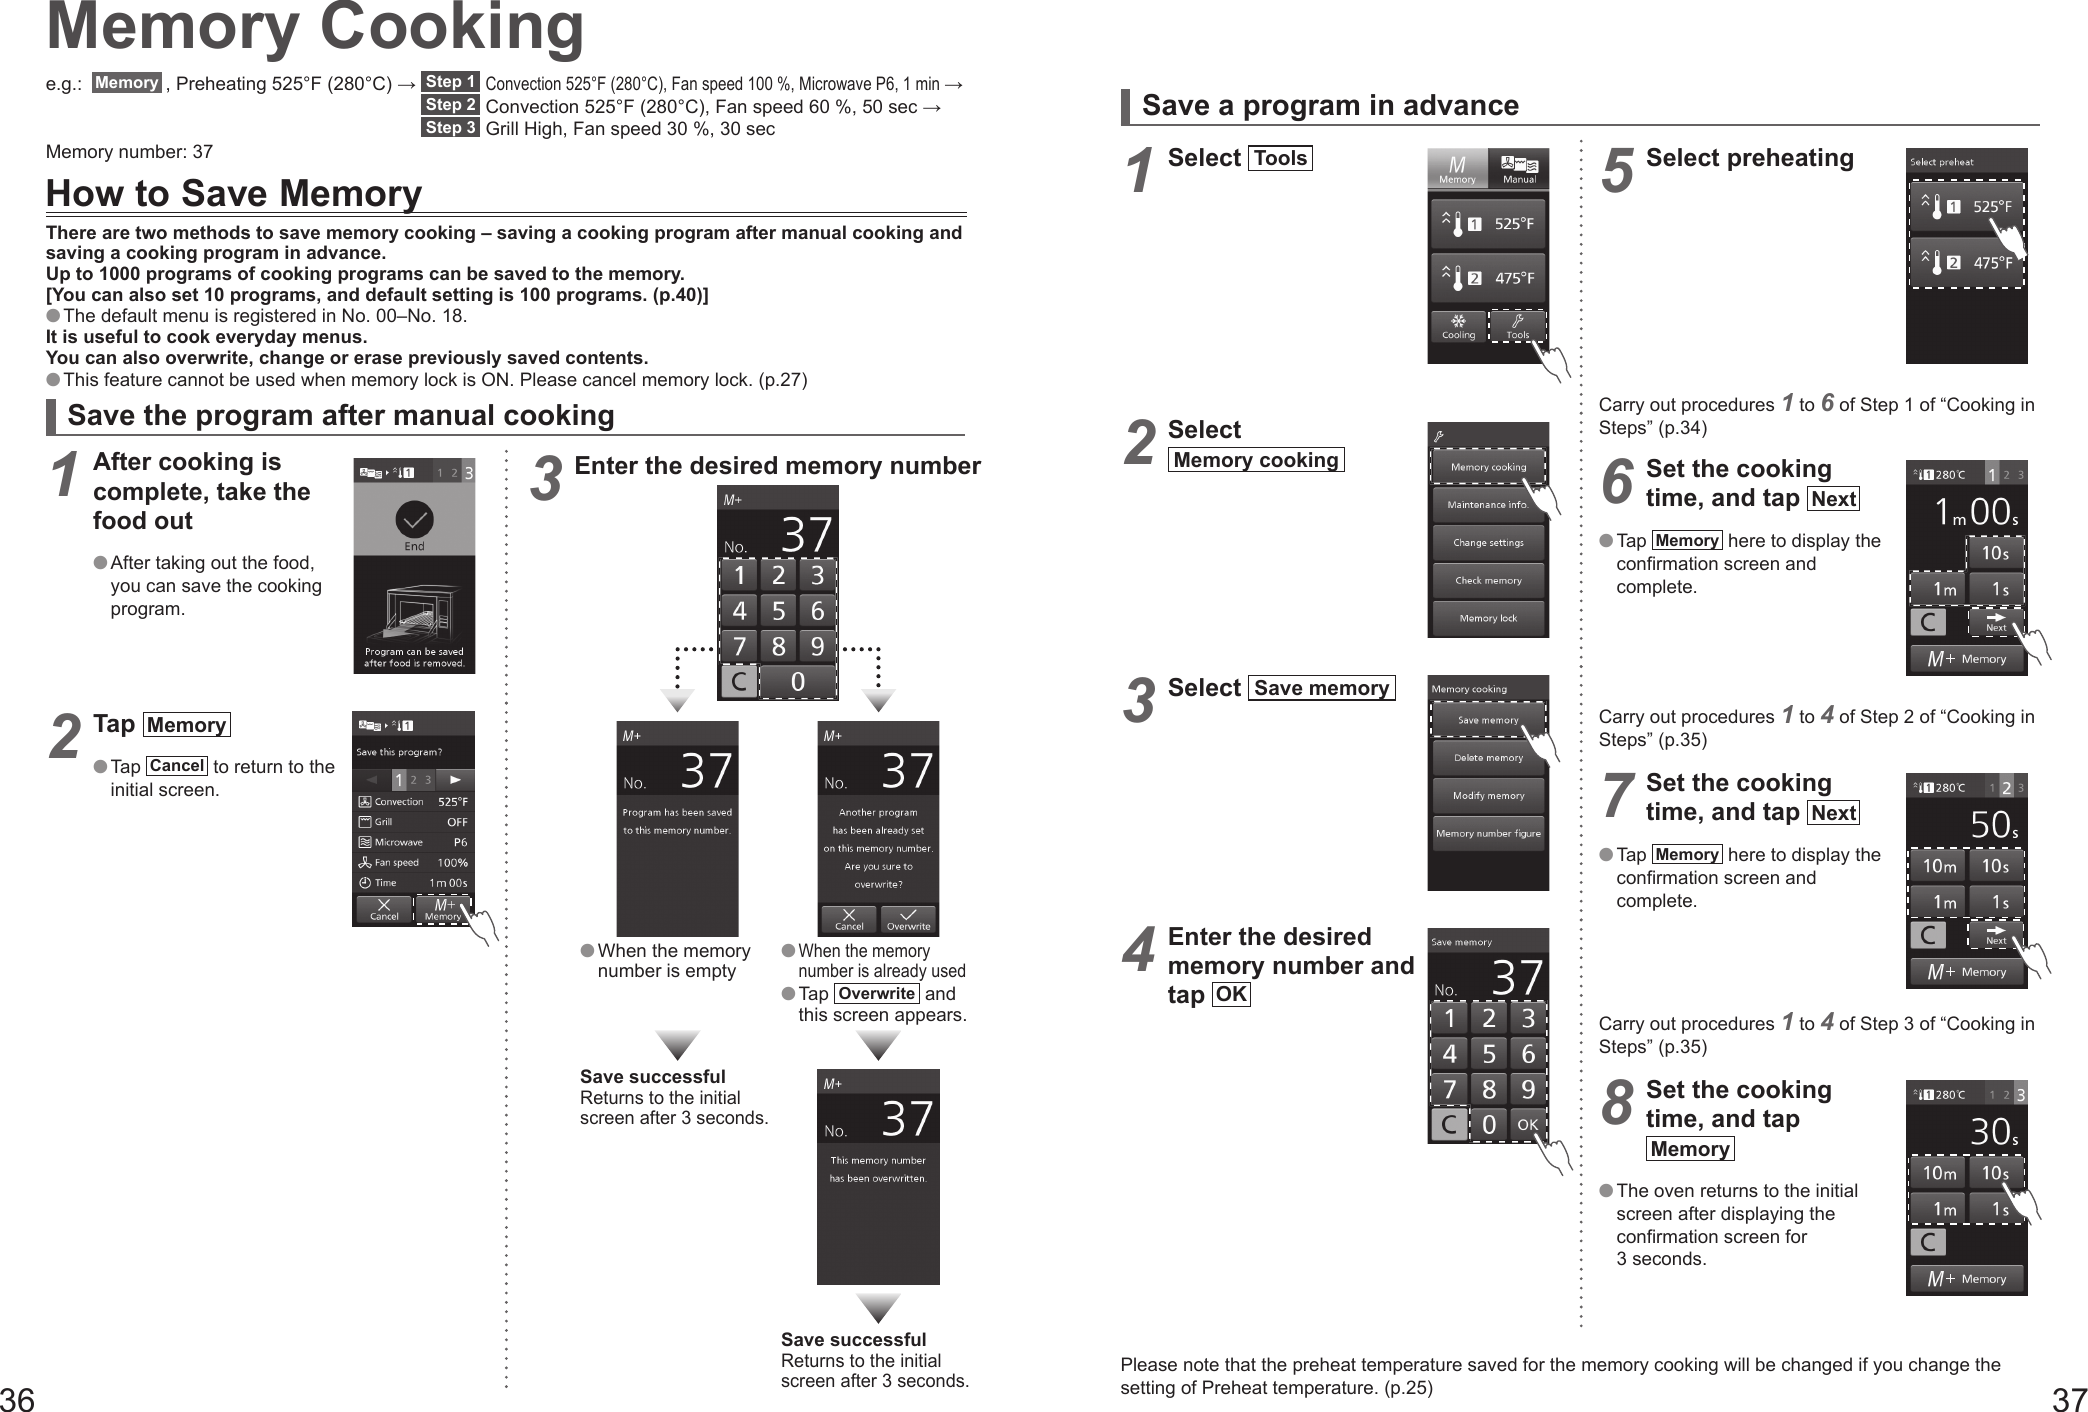 36 37Memory Cookinge.g.:  Memory  , Preheating 525°F (280°C) →  Step 1  Convection 525°F (280°C), Fan speed 100 %, Microwave P6, 1 min → Step 2  Convection 525°F (280°C), Fan speed 60 %, 50 sec →  Step 3  Grill High, Fan speed 30 %, 30 secMemory number: 37How to Save MemoryThere are two methods to save memory cooking – saving a cooking program after manual cooking and saving a cooking program in advance.Up to 1000 programs of cooking programs can be saved to the memory.[You can also set 10 programs, and default setting is 100 programs. (p.40)] The default menu is registered in No. 00–No. 18.It is useful to cook everyday menus.You can also overwrite, change or erase previously saved contents. This feature cannot be used when memory lock is ON. Please cancel memory lock. (p.27)Save the program after manual cooking1 After cooking is complete, take the food out After taking out the food, you can save the cooking program.2 Tap  Memory   Tap  Cancel  to return to the initial screen.3 Enter the desired memory number When the memory number is empty When the memory number is already used Tap  Overwrite  and this screen appears.Save successfulReturns to the initial screen after 3 seconds.Save successfulReturns to the initial screen after 3 seconds.Save a program in advance1 Select  Tools  2 Select Memory cooking  3 Select  Save memory  4 Enter the desired memory number and tap  OK 5 Select preheatingCarry out procedures 1 to 6 of Step 1 of “Cooking in Steps” (p.34)6 Set the cooking time, and tap  Next   Tap  Memory  here to display the confirmation screen and complete.Carry out procedures 1 to 4 of Step 2 of “Cooking in Steps” (p.35)7 Set the cooking time, and tap  Next   Tap  Memory  here to display the confirmation screen and complete.Carry out procedures 1 to 4 of Step 3 of “Cooking in Steps” (p.35)8 Set the cooking time, and tap Memory   The oven returns to the initial screen after displaying the confirmation screen for 3 seconds.Please note that the preheat temperature saved for the memory cooking will be changed if you change the setting of Preheat temperature. (p.25)